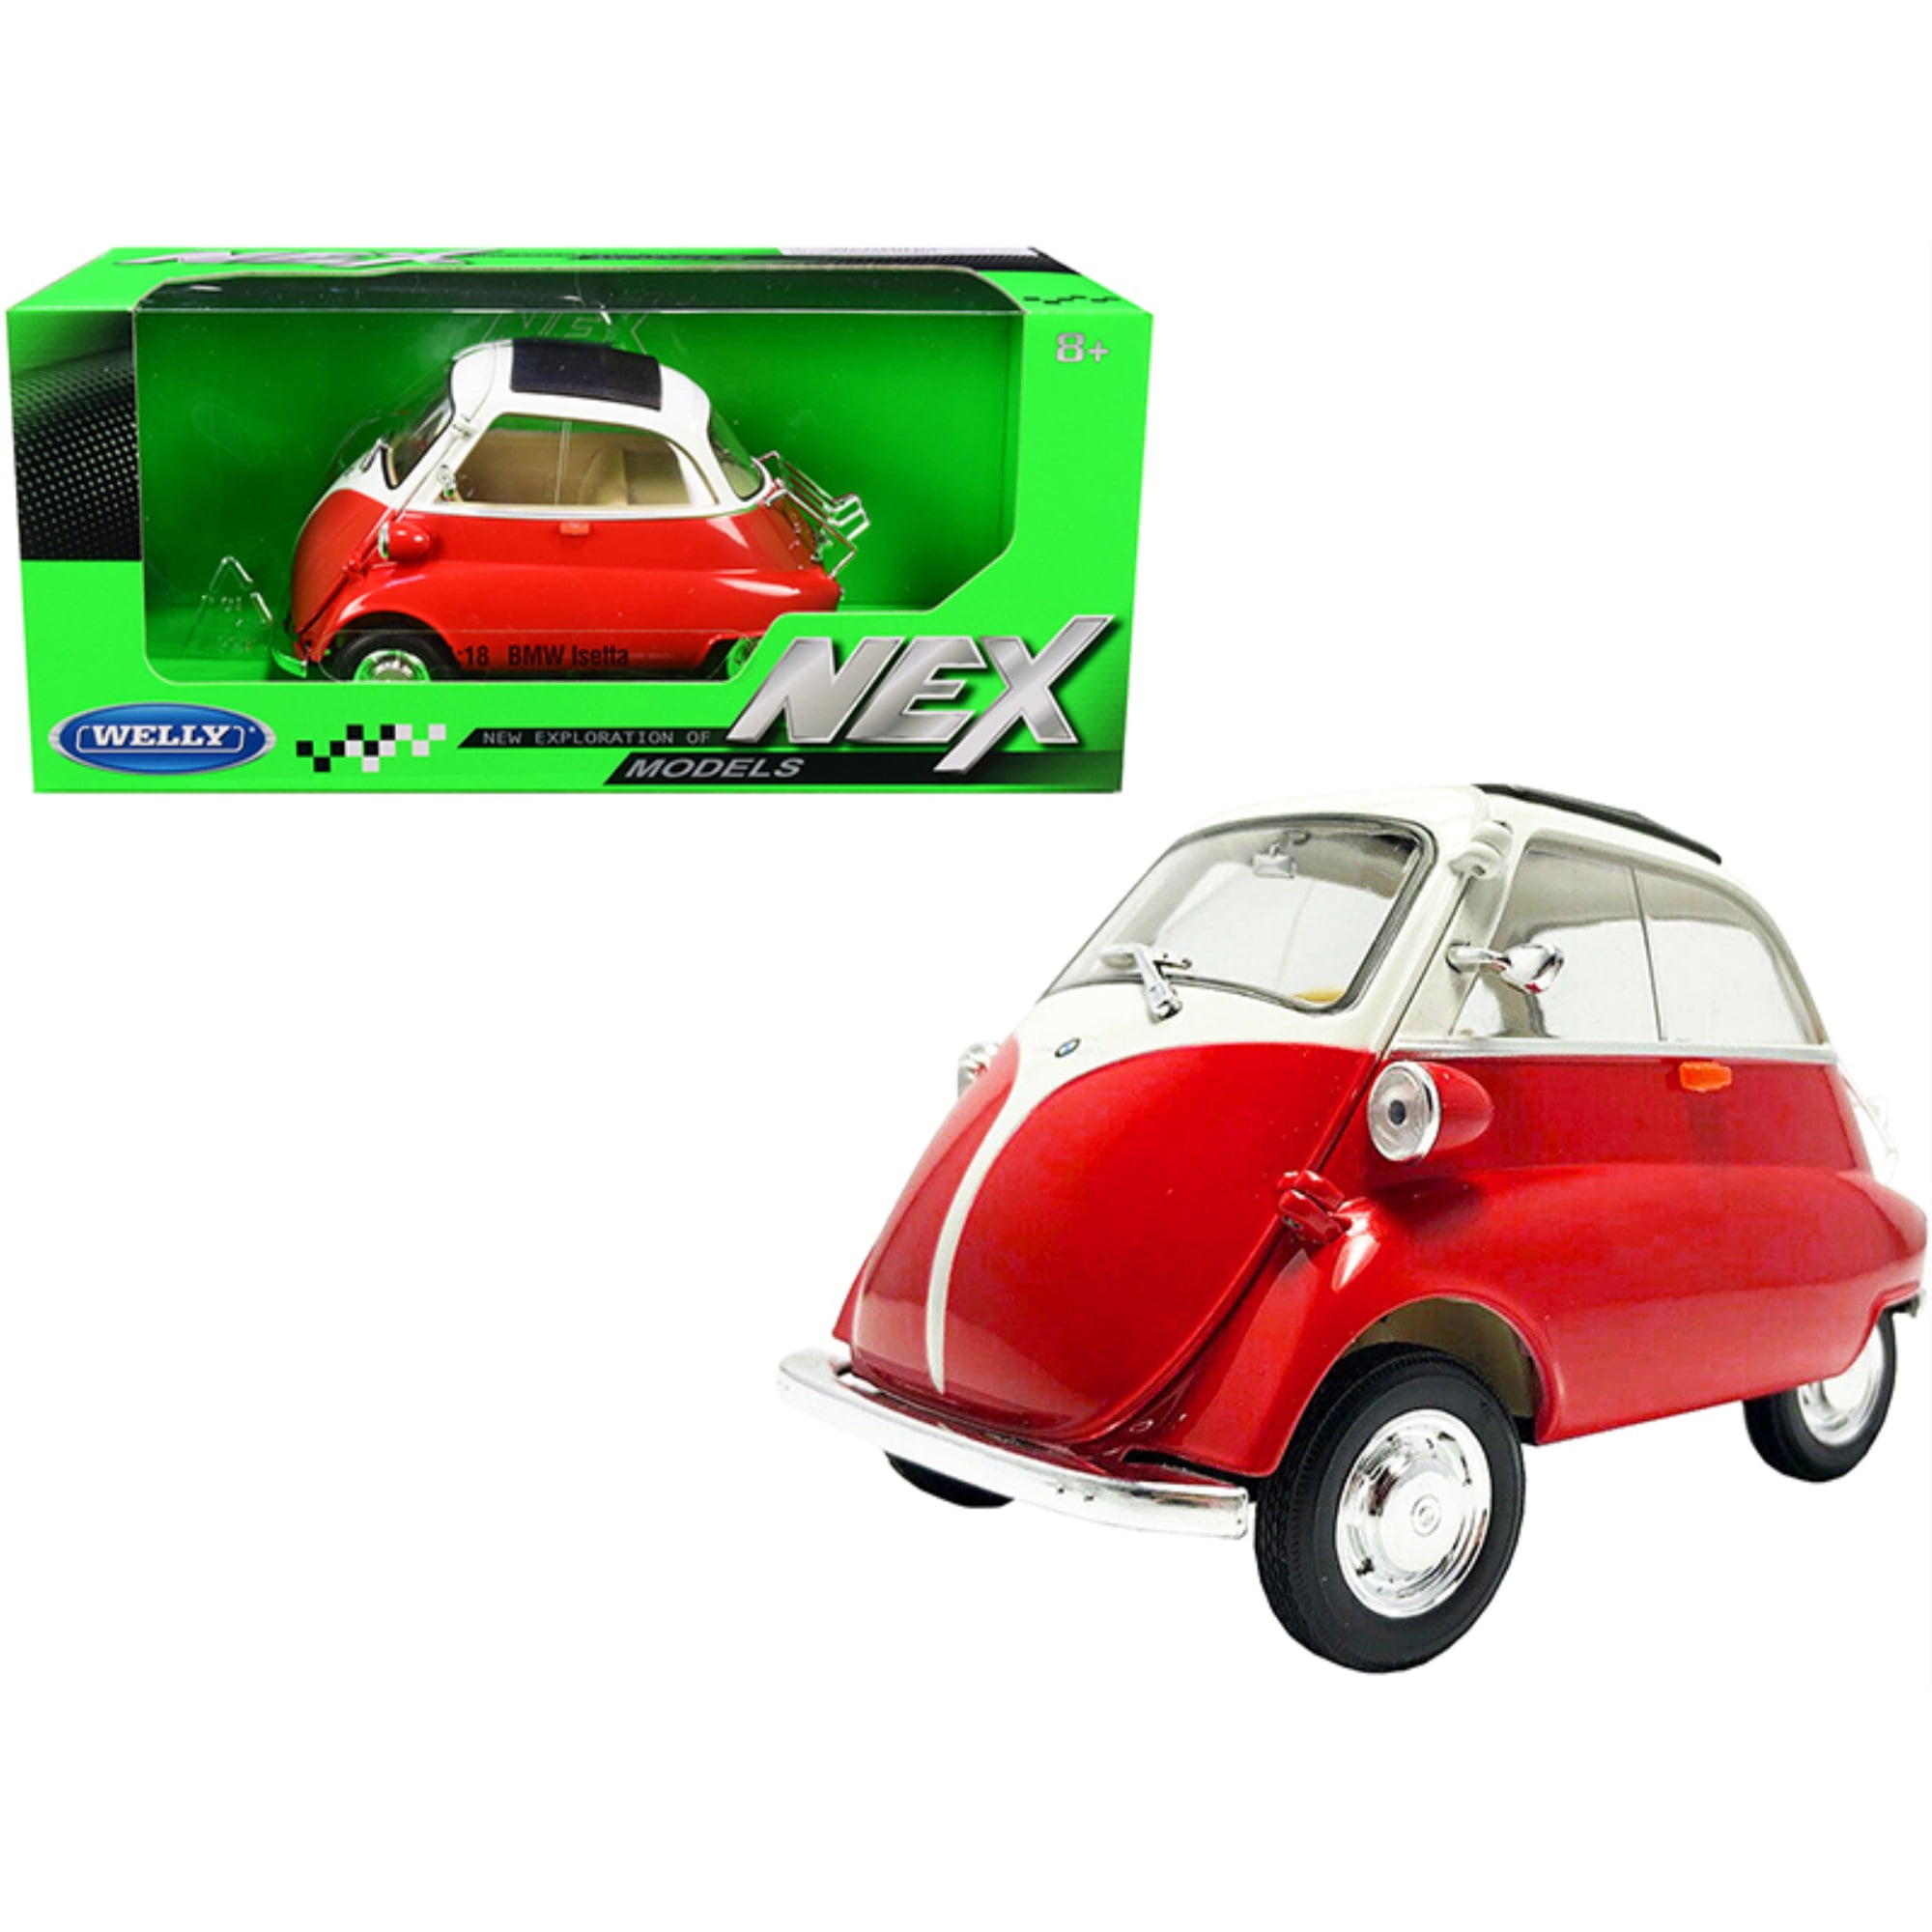 Picture of Welly 24096rd BMW Isetta Red & White NEX Models 1 by 18 Diecast Model Car